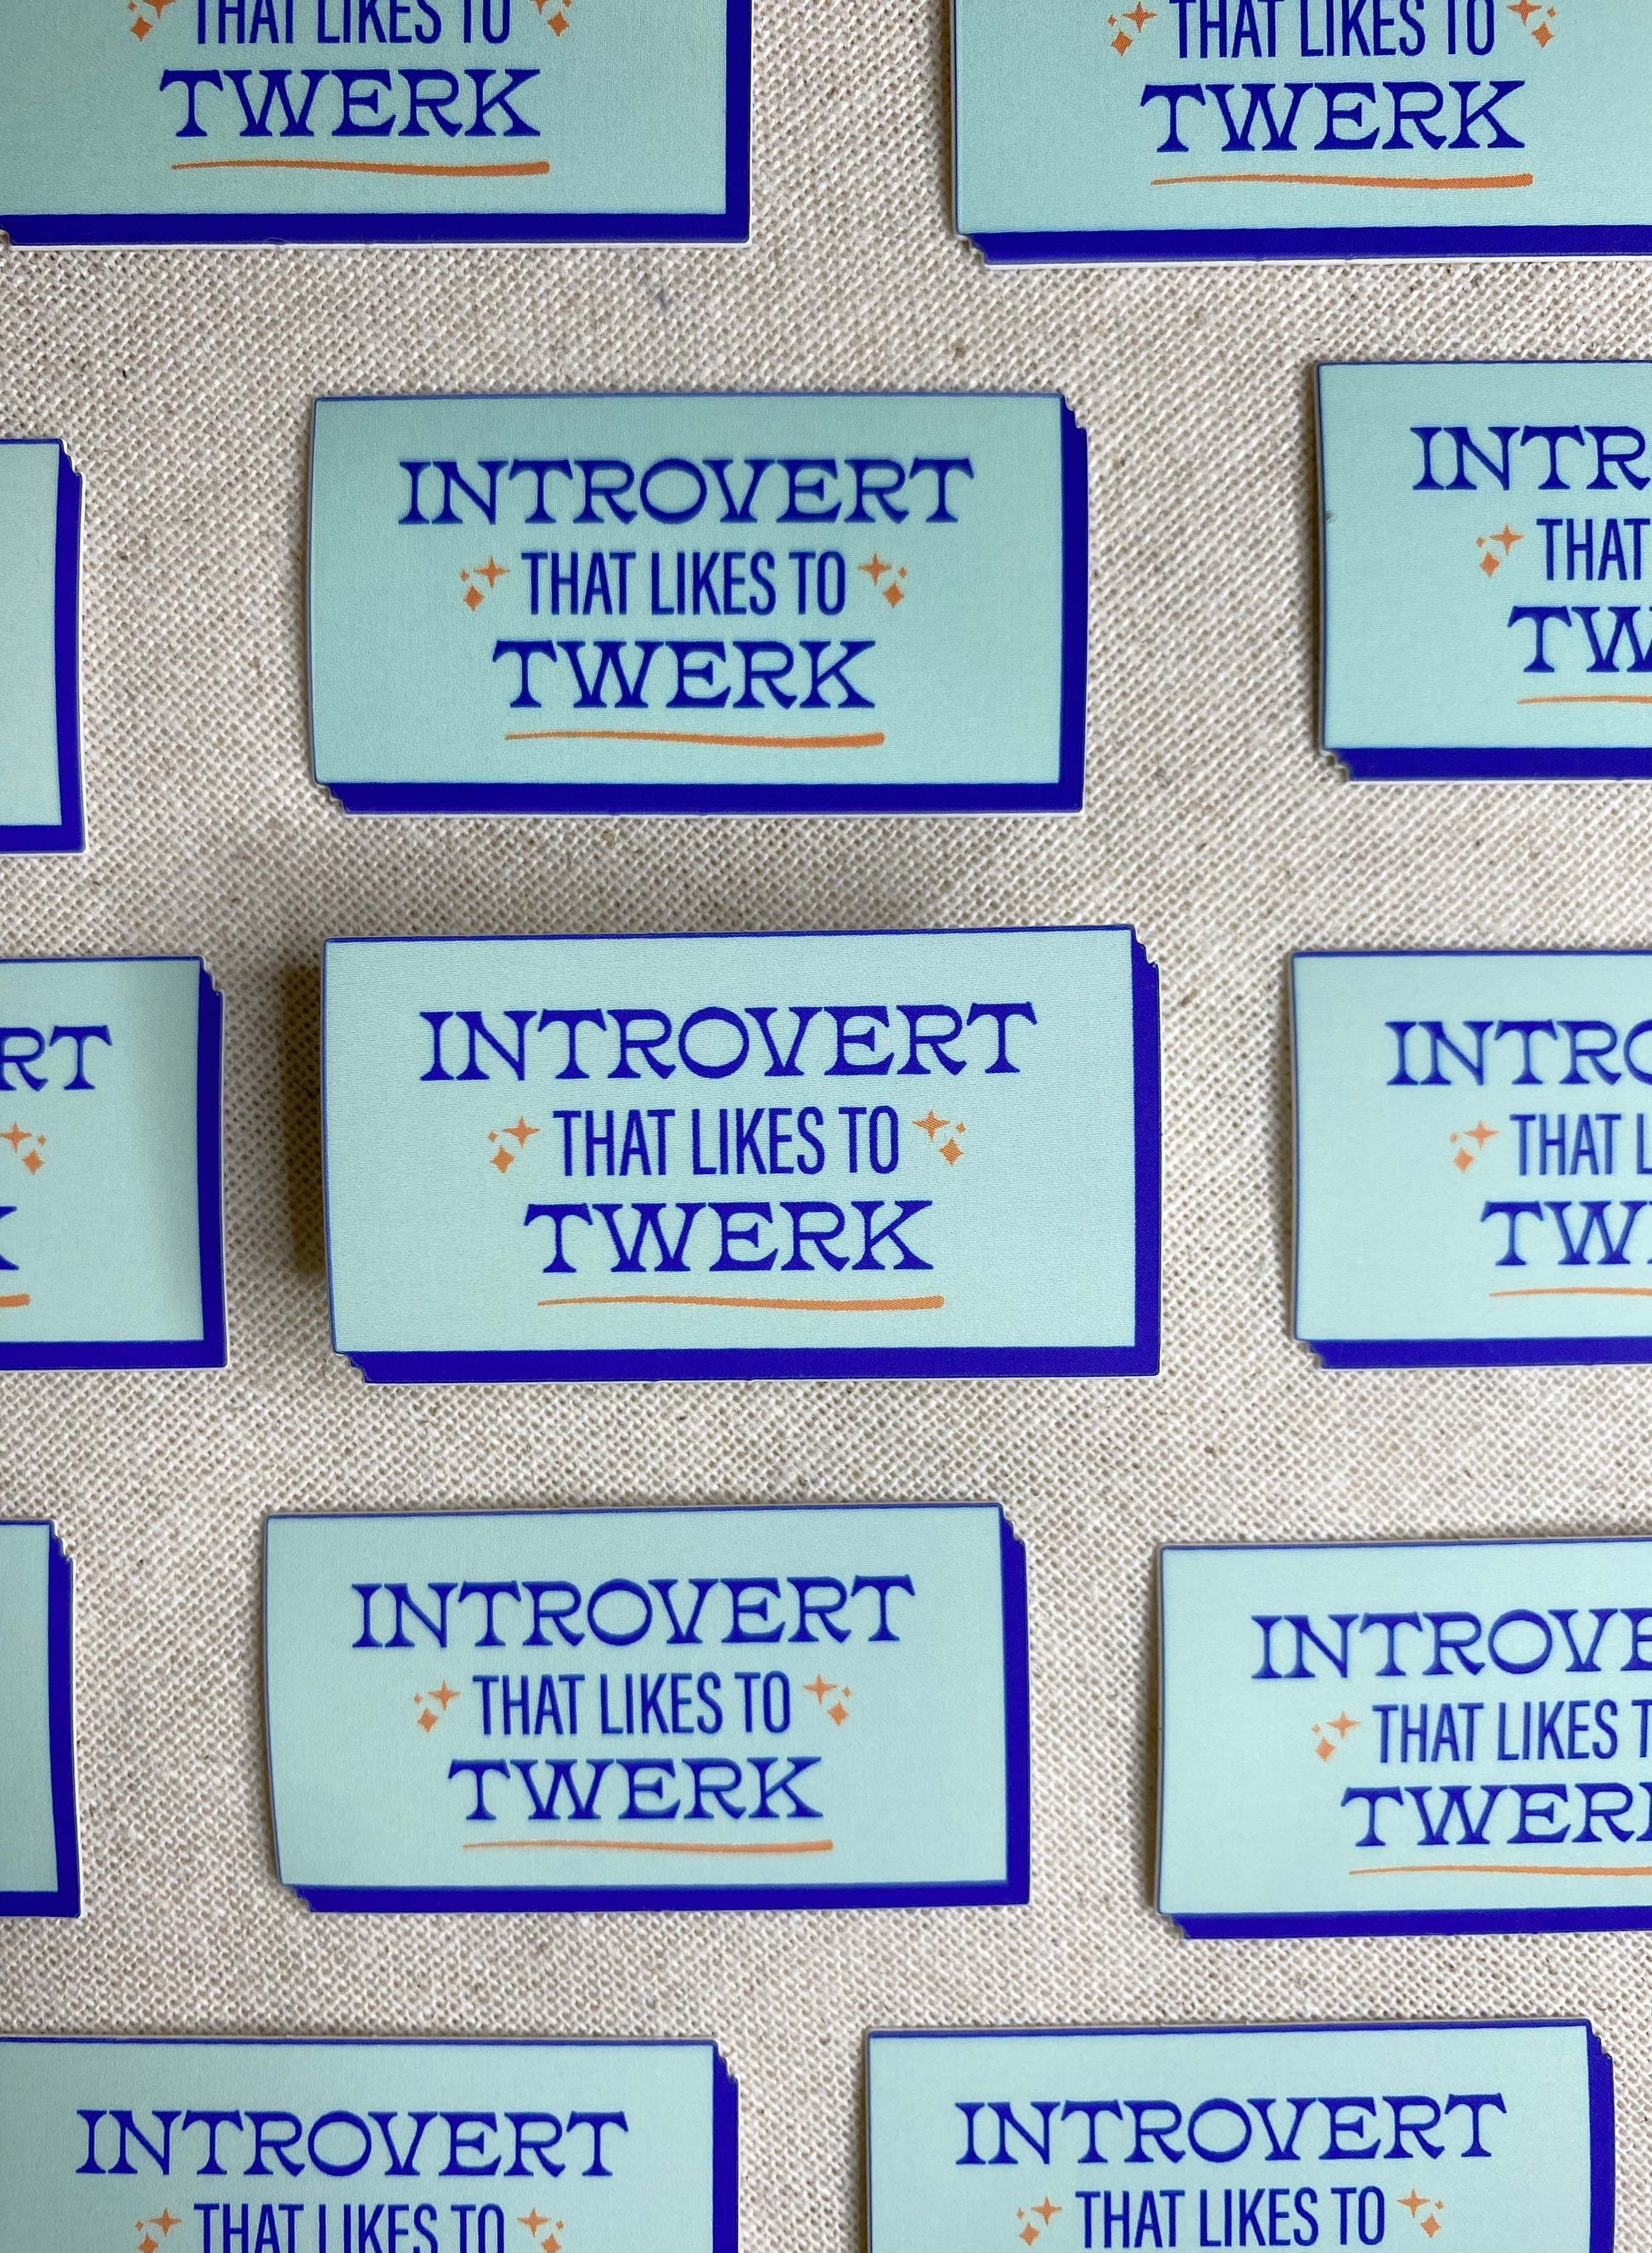 Introverts Twerk high quality die cut vinyl waterproof and scratch resistant sticker from Goods Made By Digitrillnana. Perfect for laptops, water bottles, phone cases, luggage, journals, and more! Black Woman Owned.